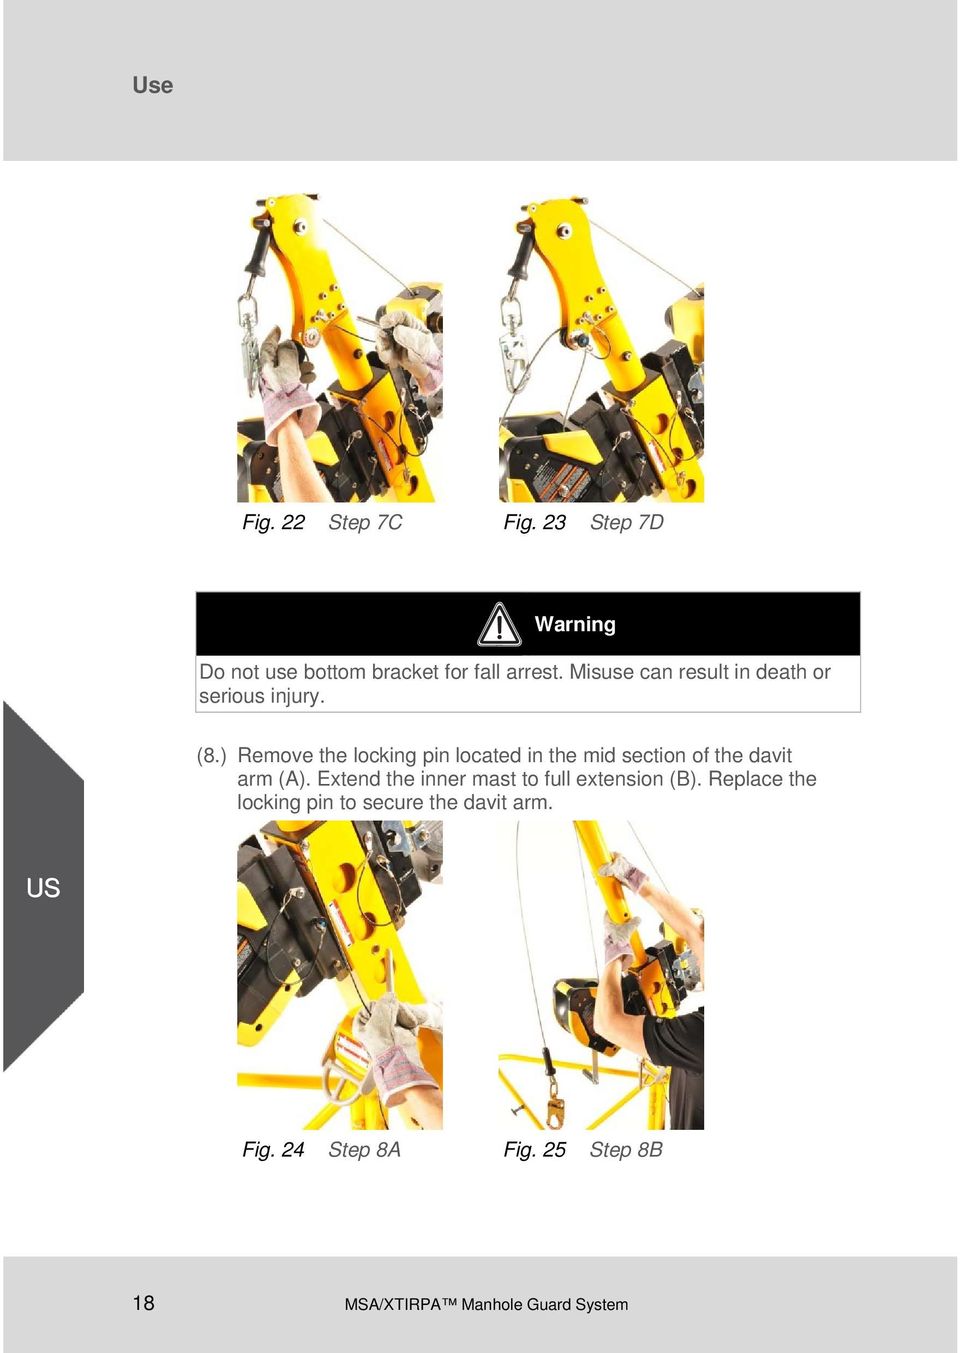 ) Remove the locking pin located in the mid section of the davit arm (A).